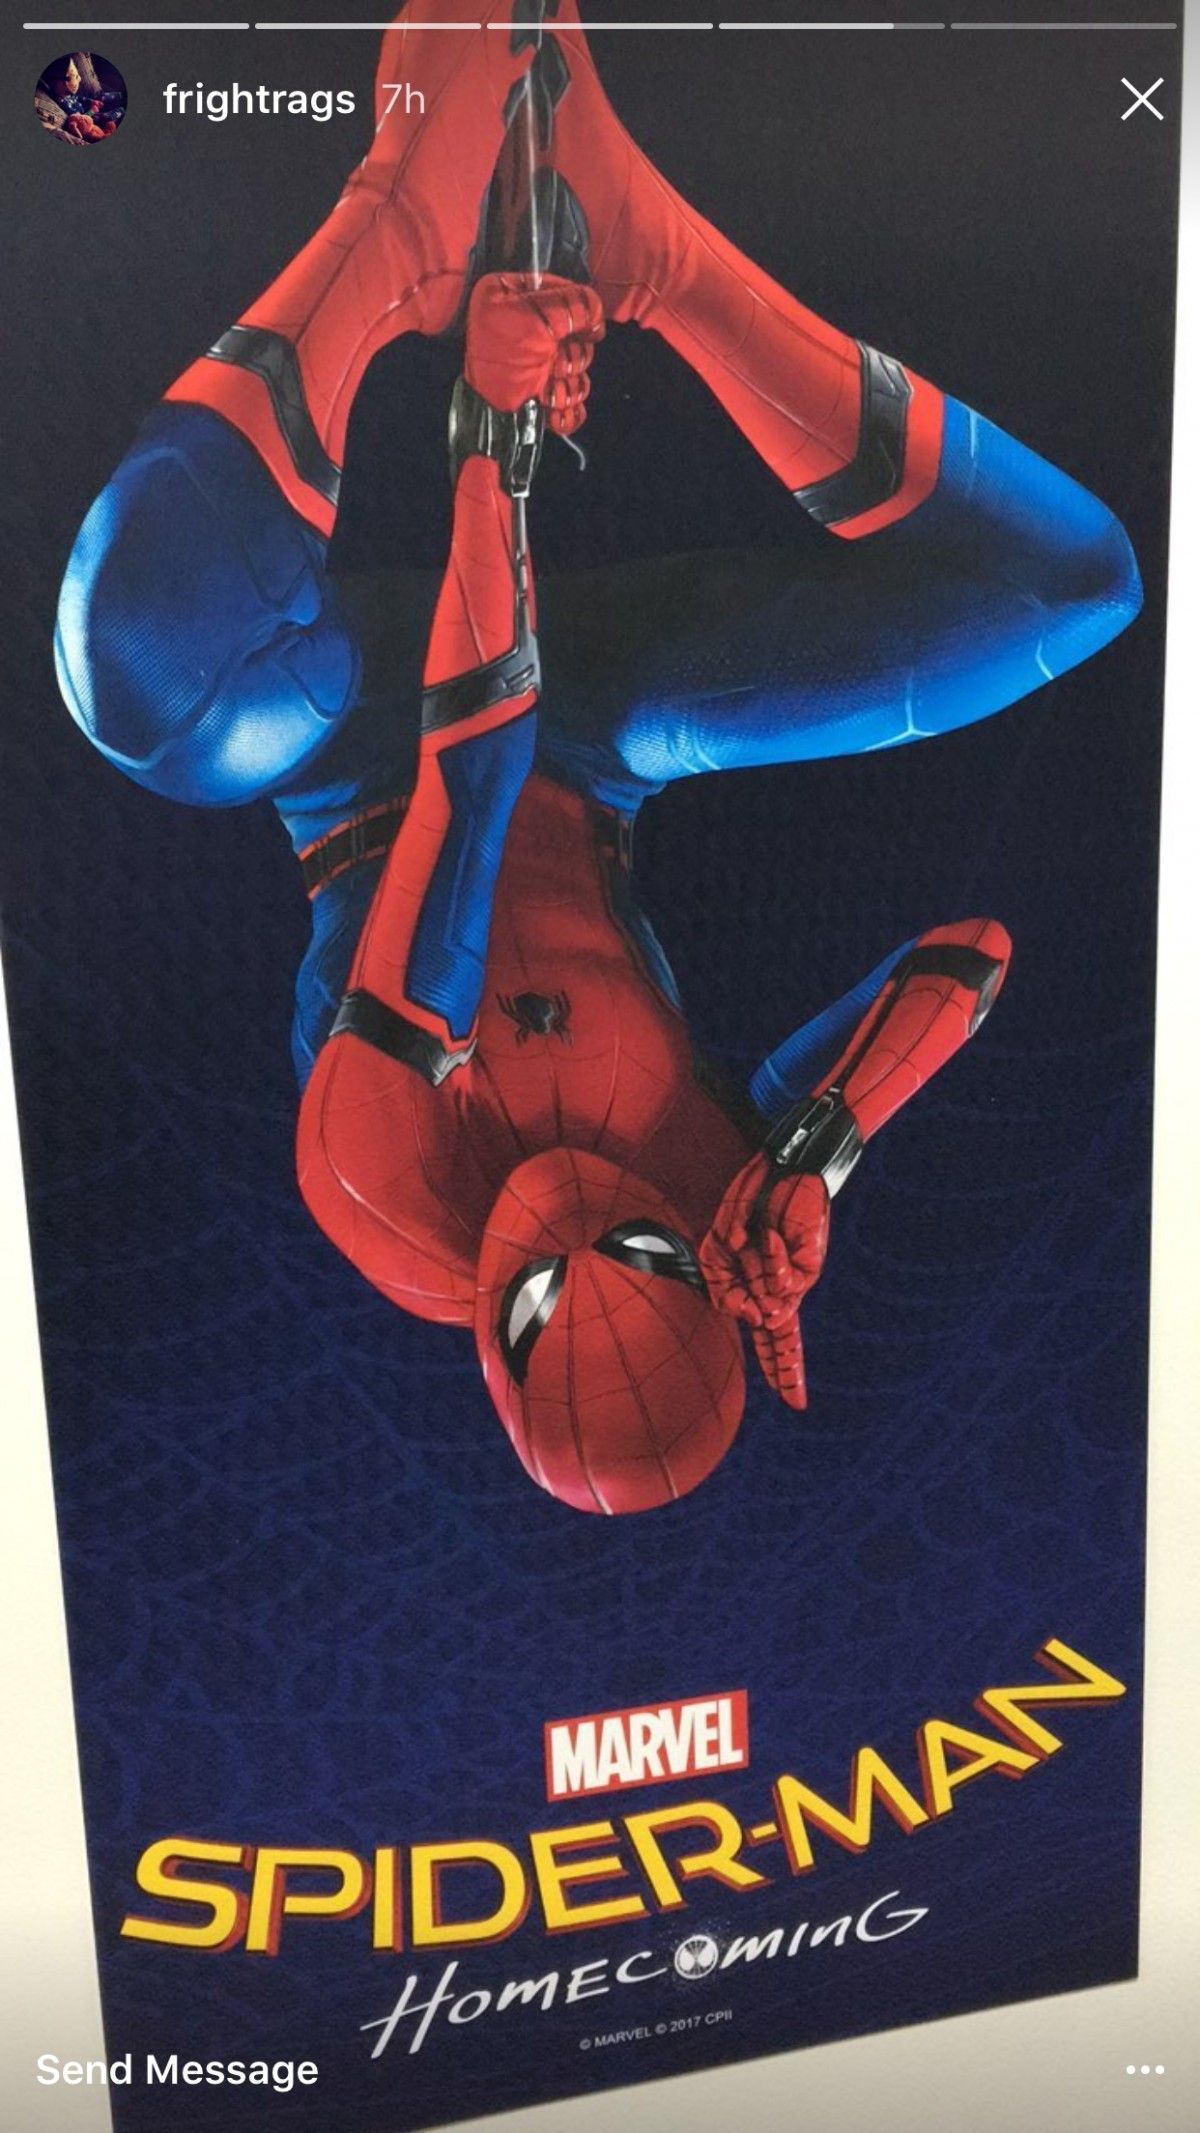 First promo poster for Spider-Man: Homecoming